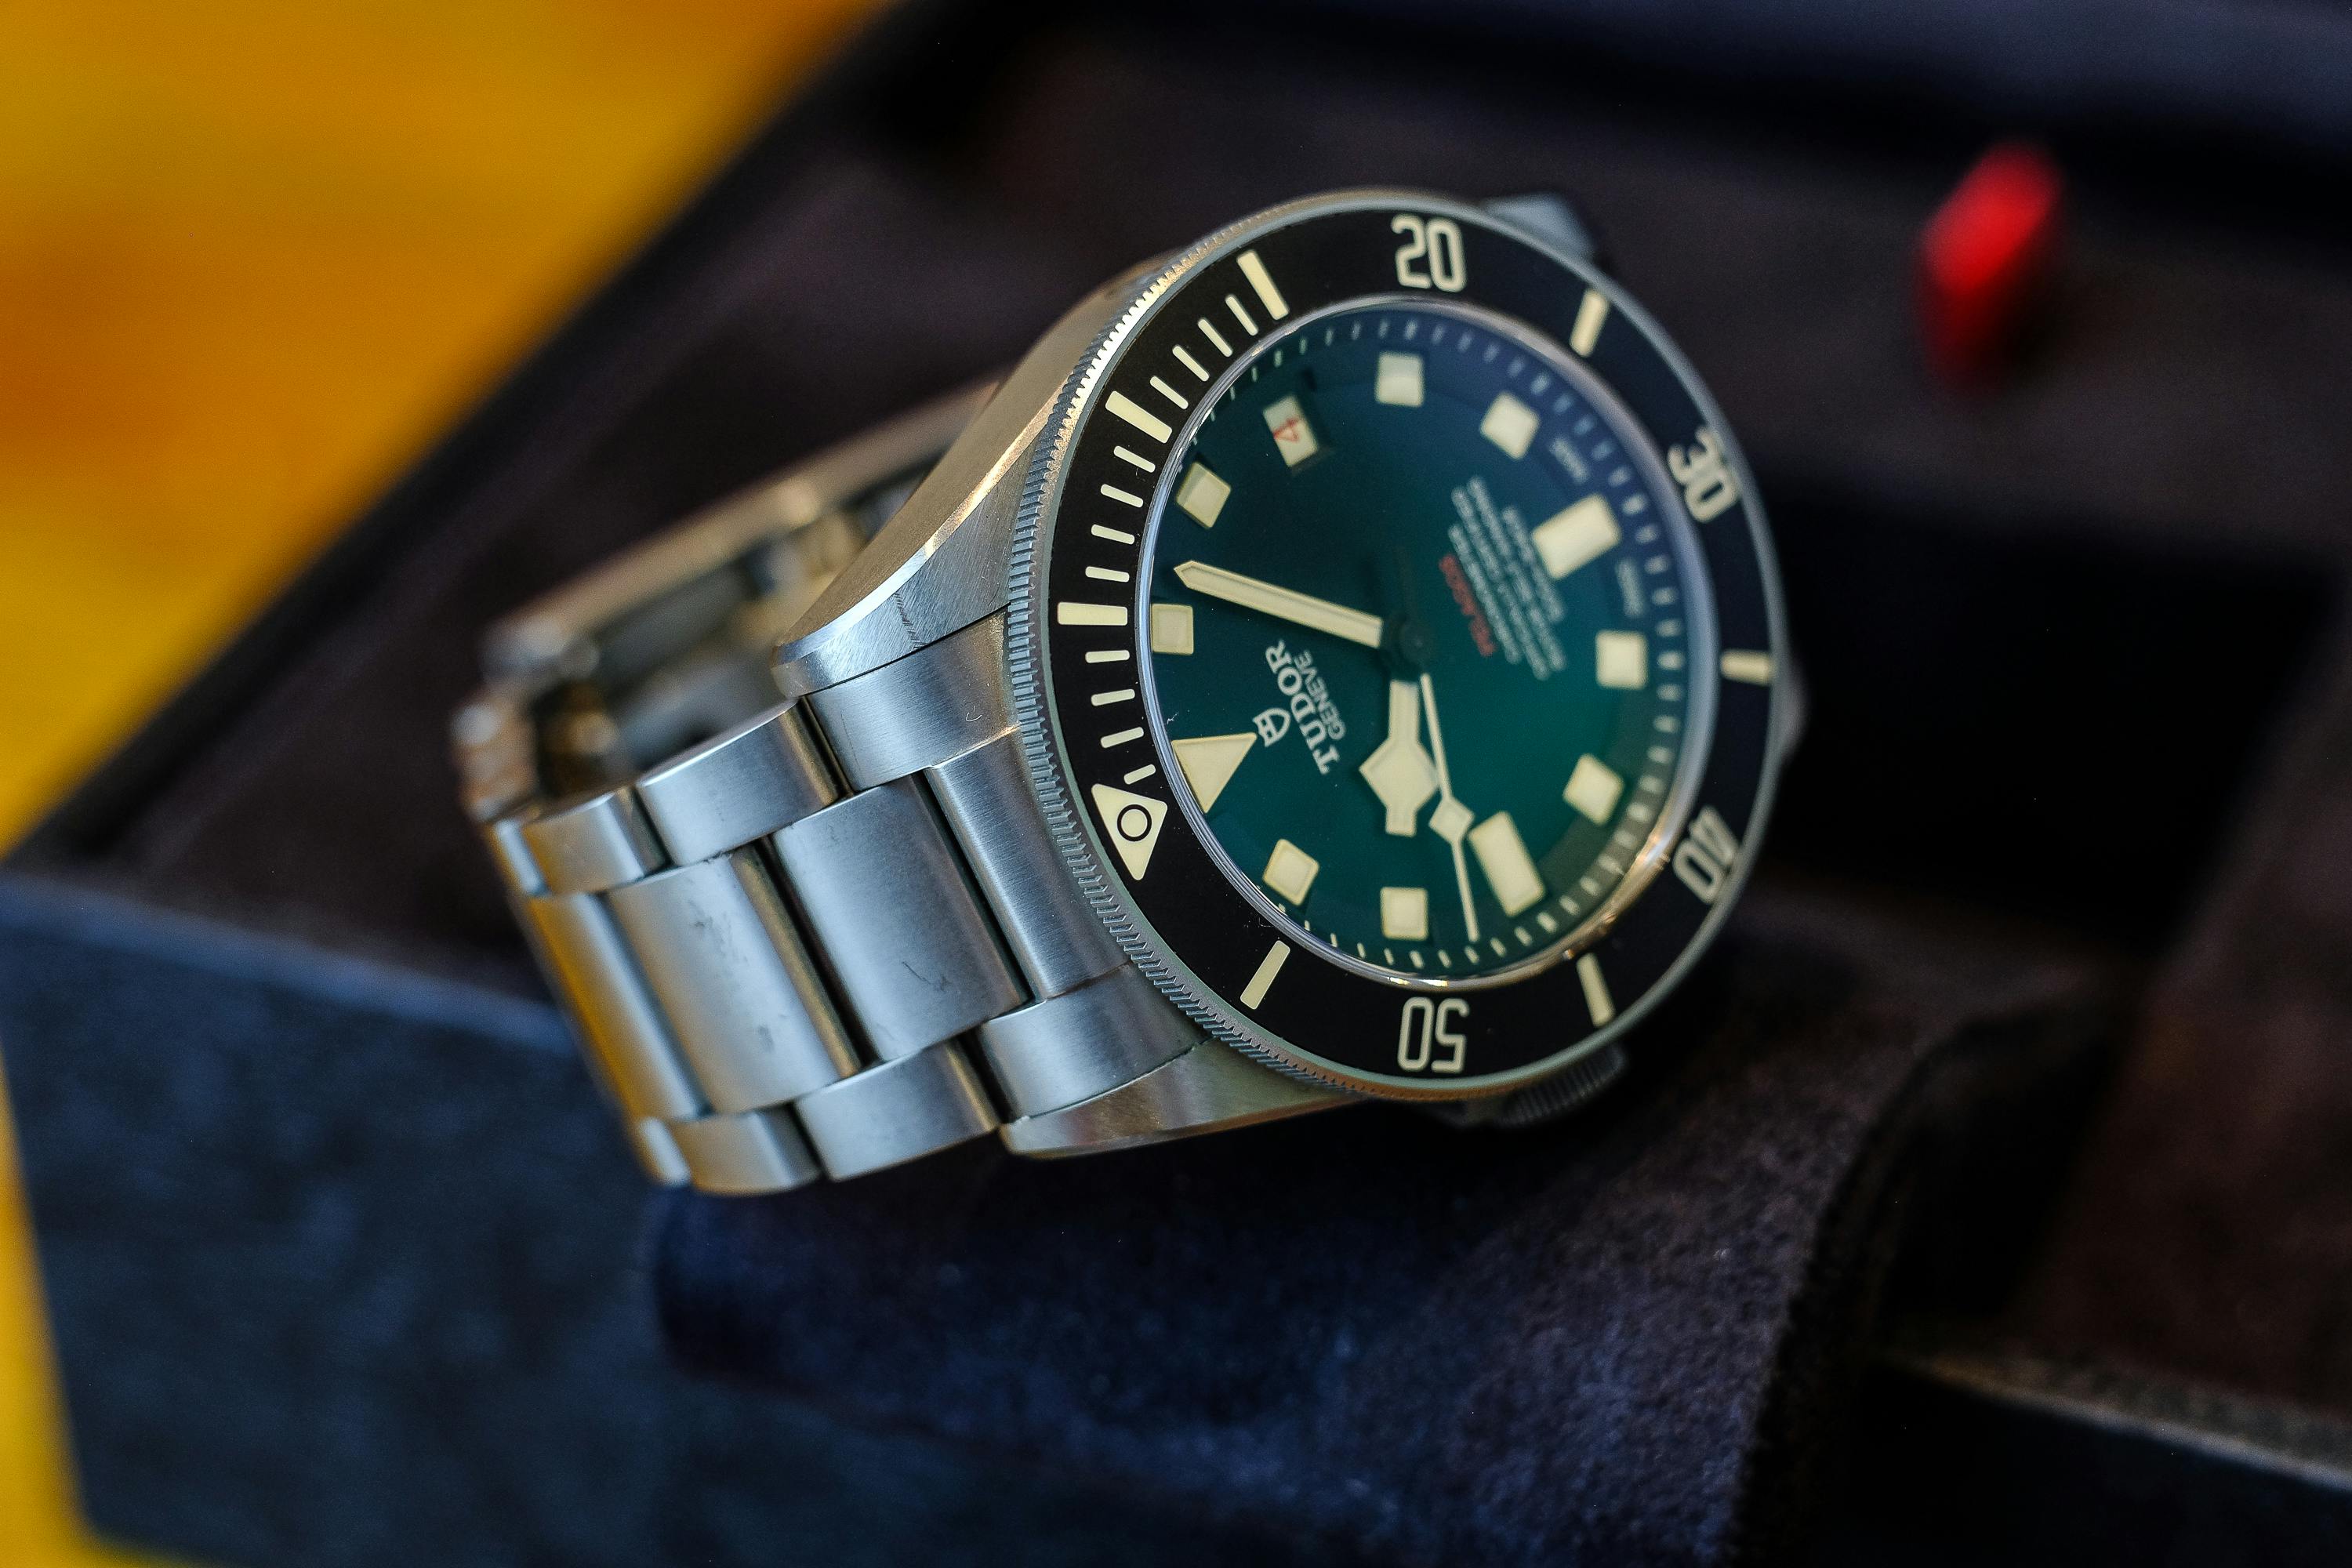 2019 TUDOR PELAGOS LHD for sale by auction in Cheltenham ...